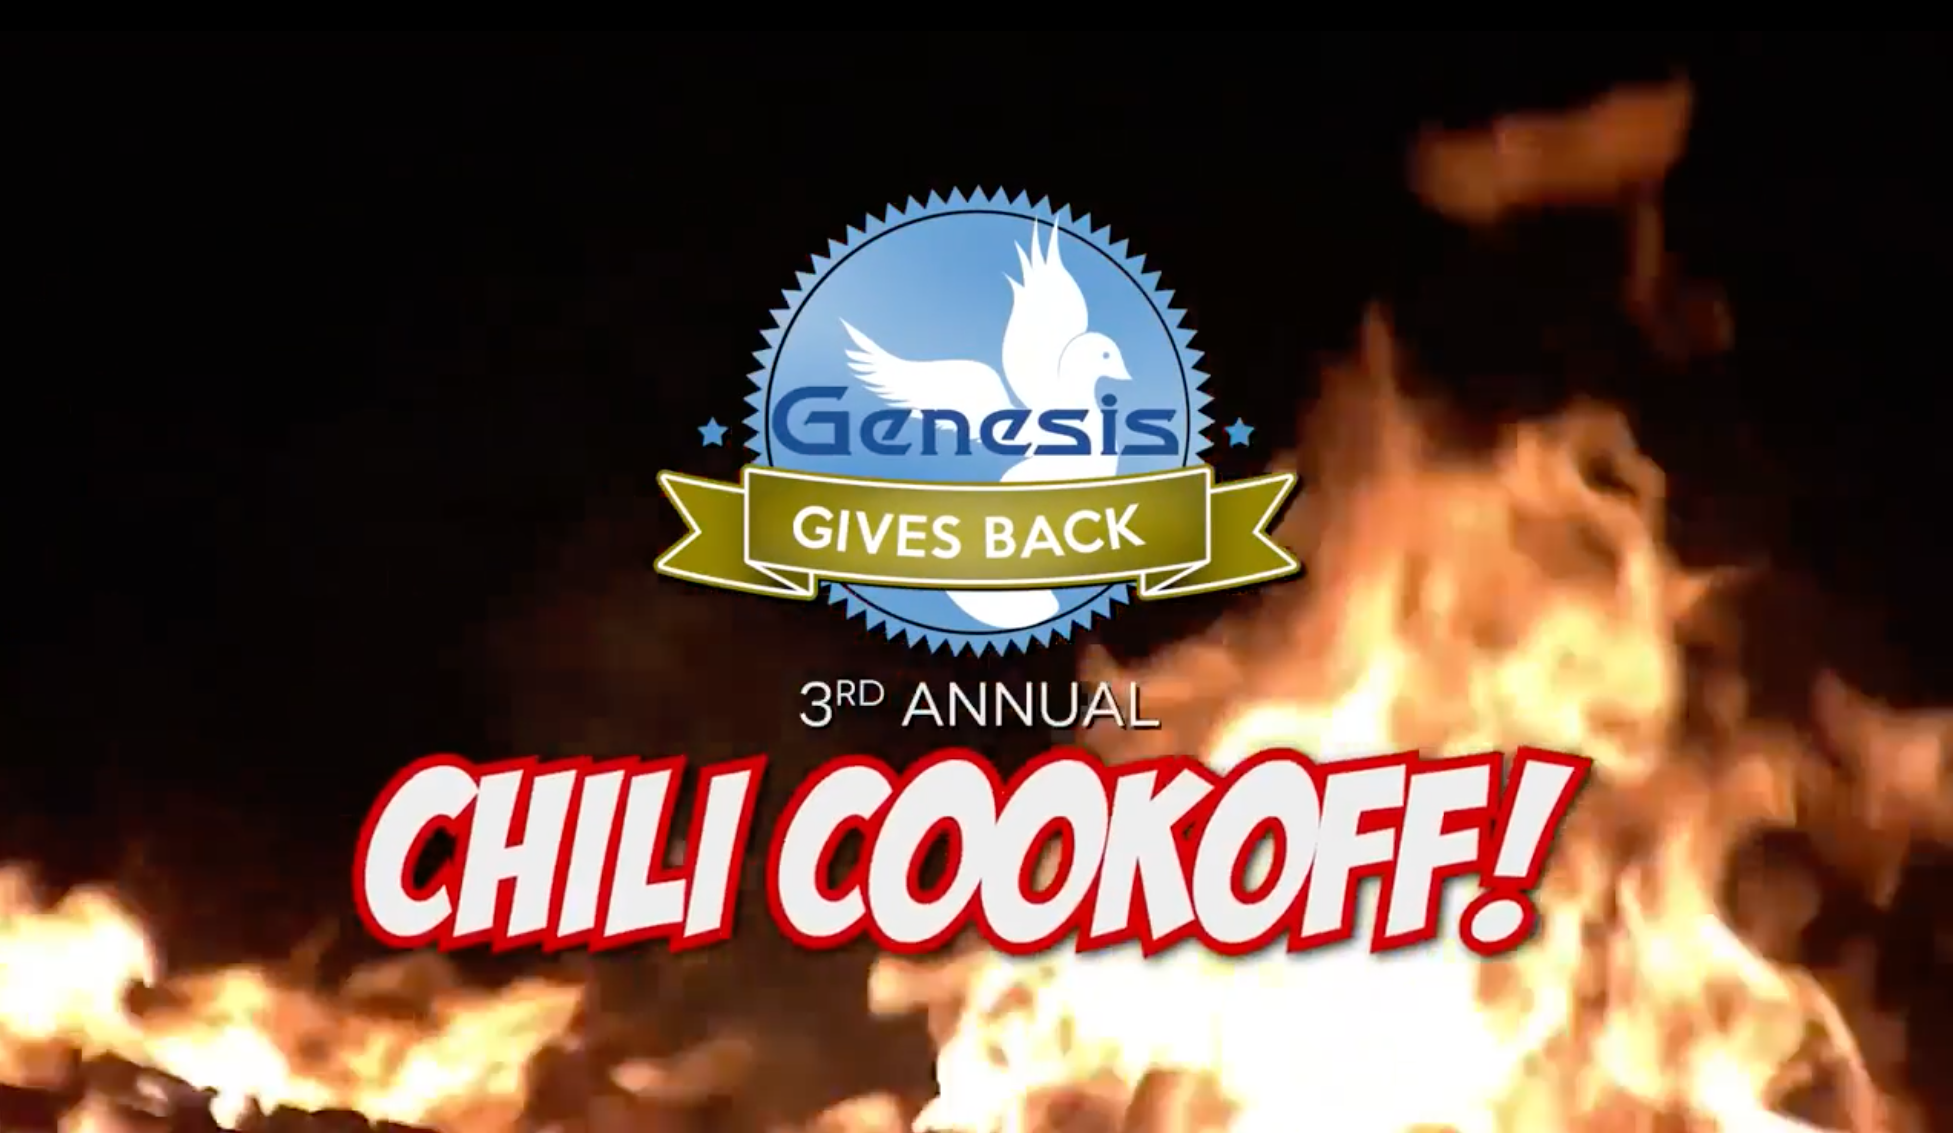 3rd-annual-chili-cookoff-benefit-the-genesis-group